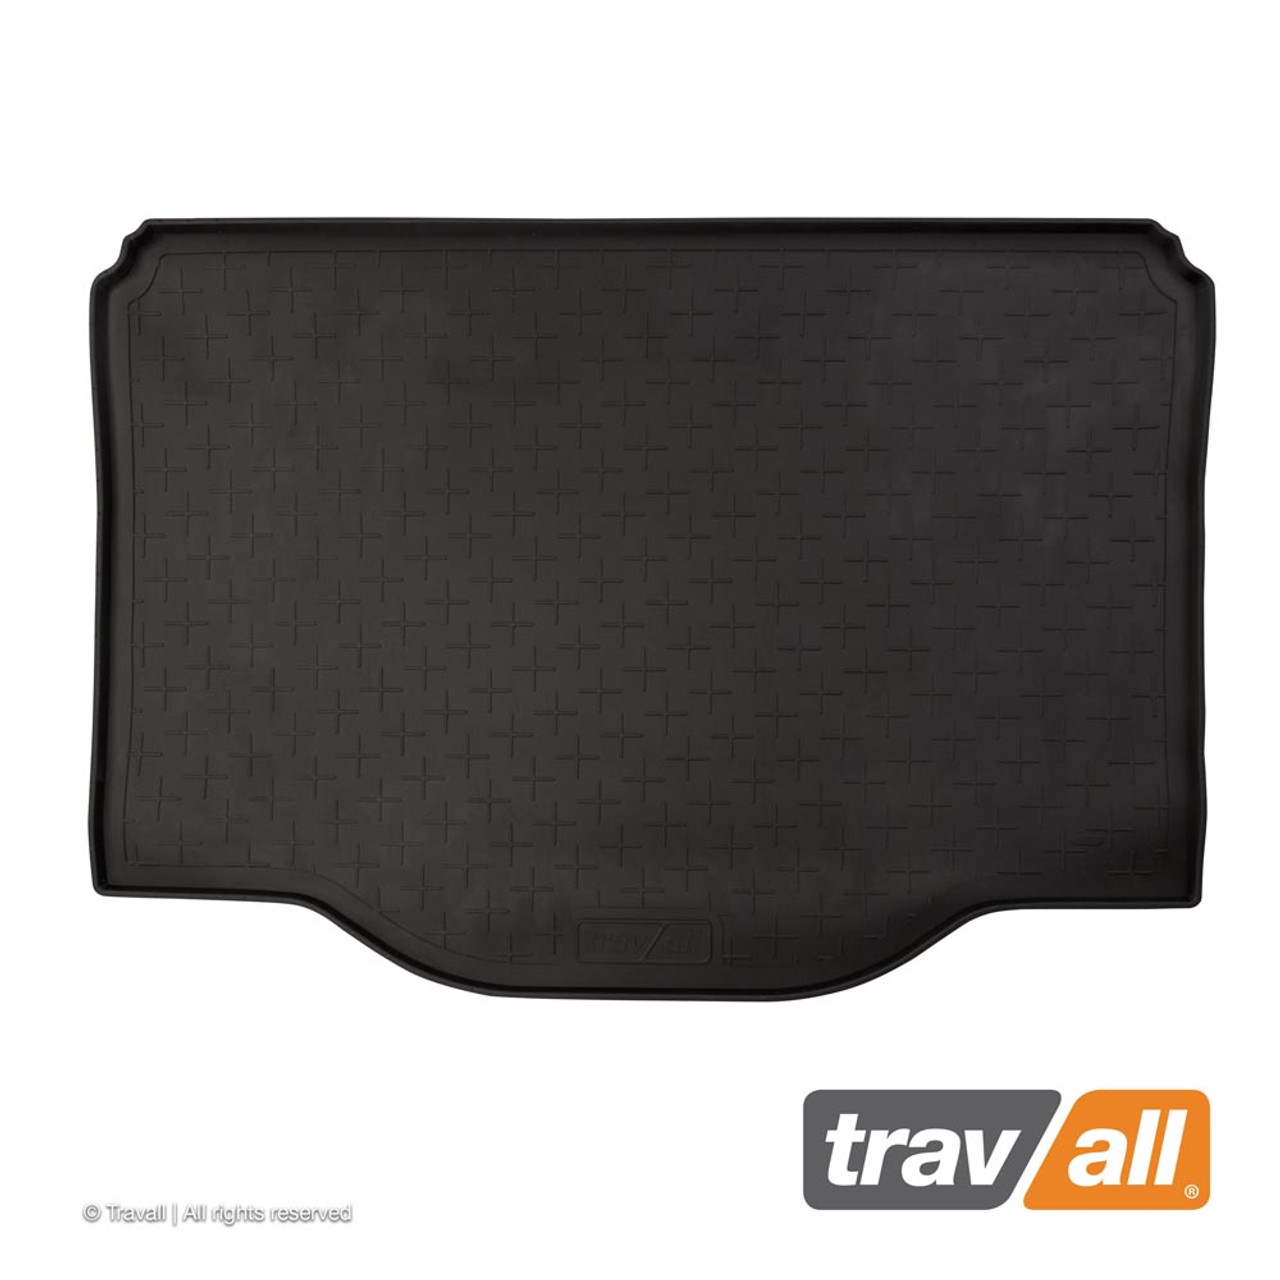 TBM1110 Travall Boot Mat for Vauxhall Mokka 2012 onwards and Chevrolet Trax 2013 onwards